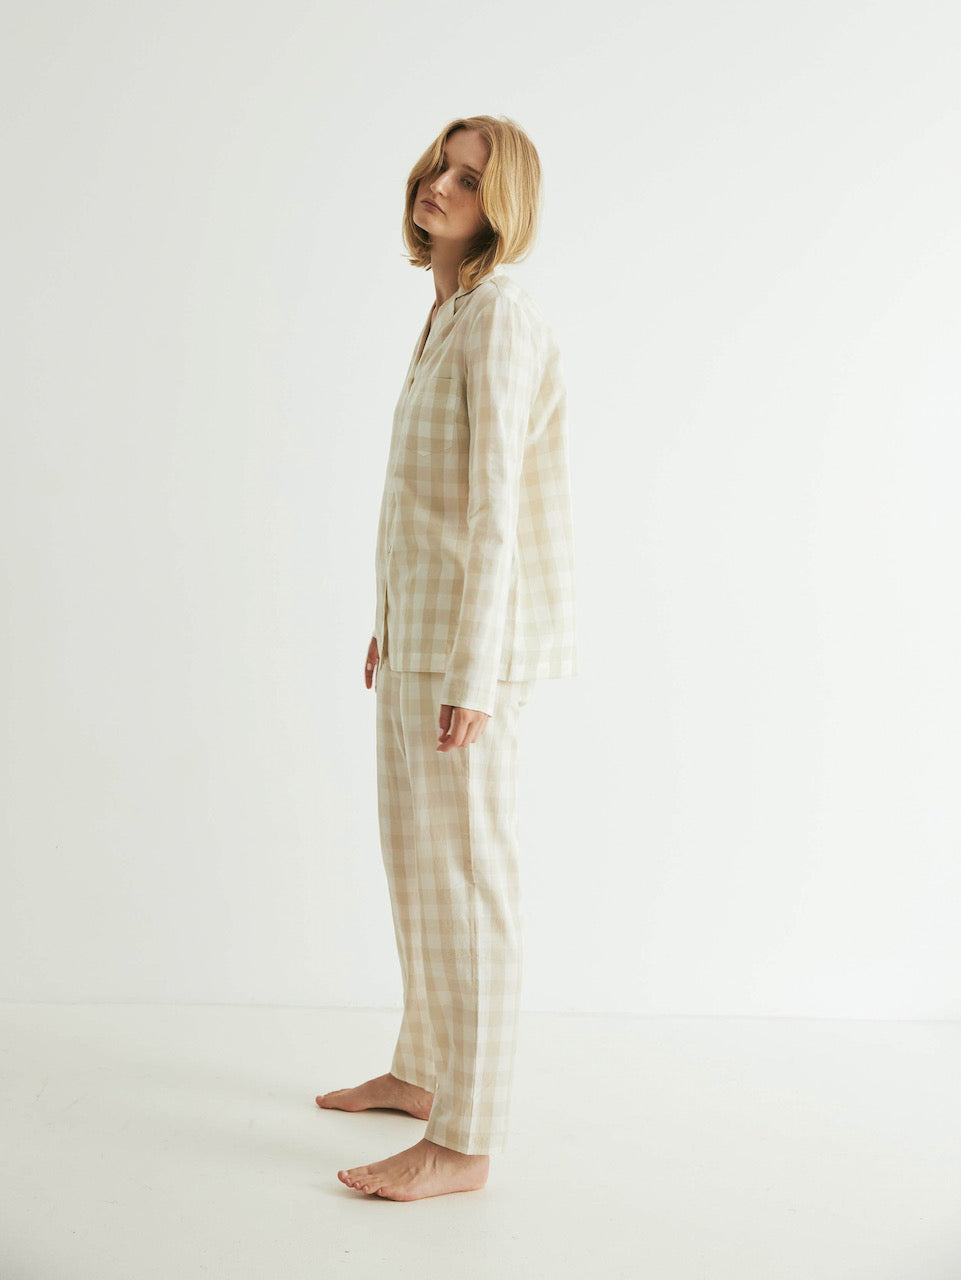 A woman is standing in a white room wearing a general sleep Classic Set - Oatmeal Gingham.